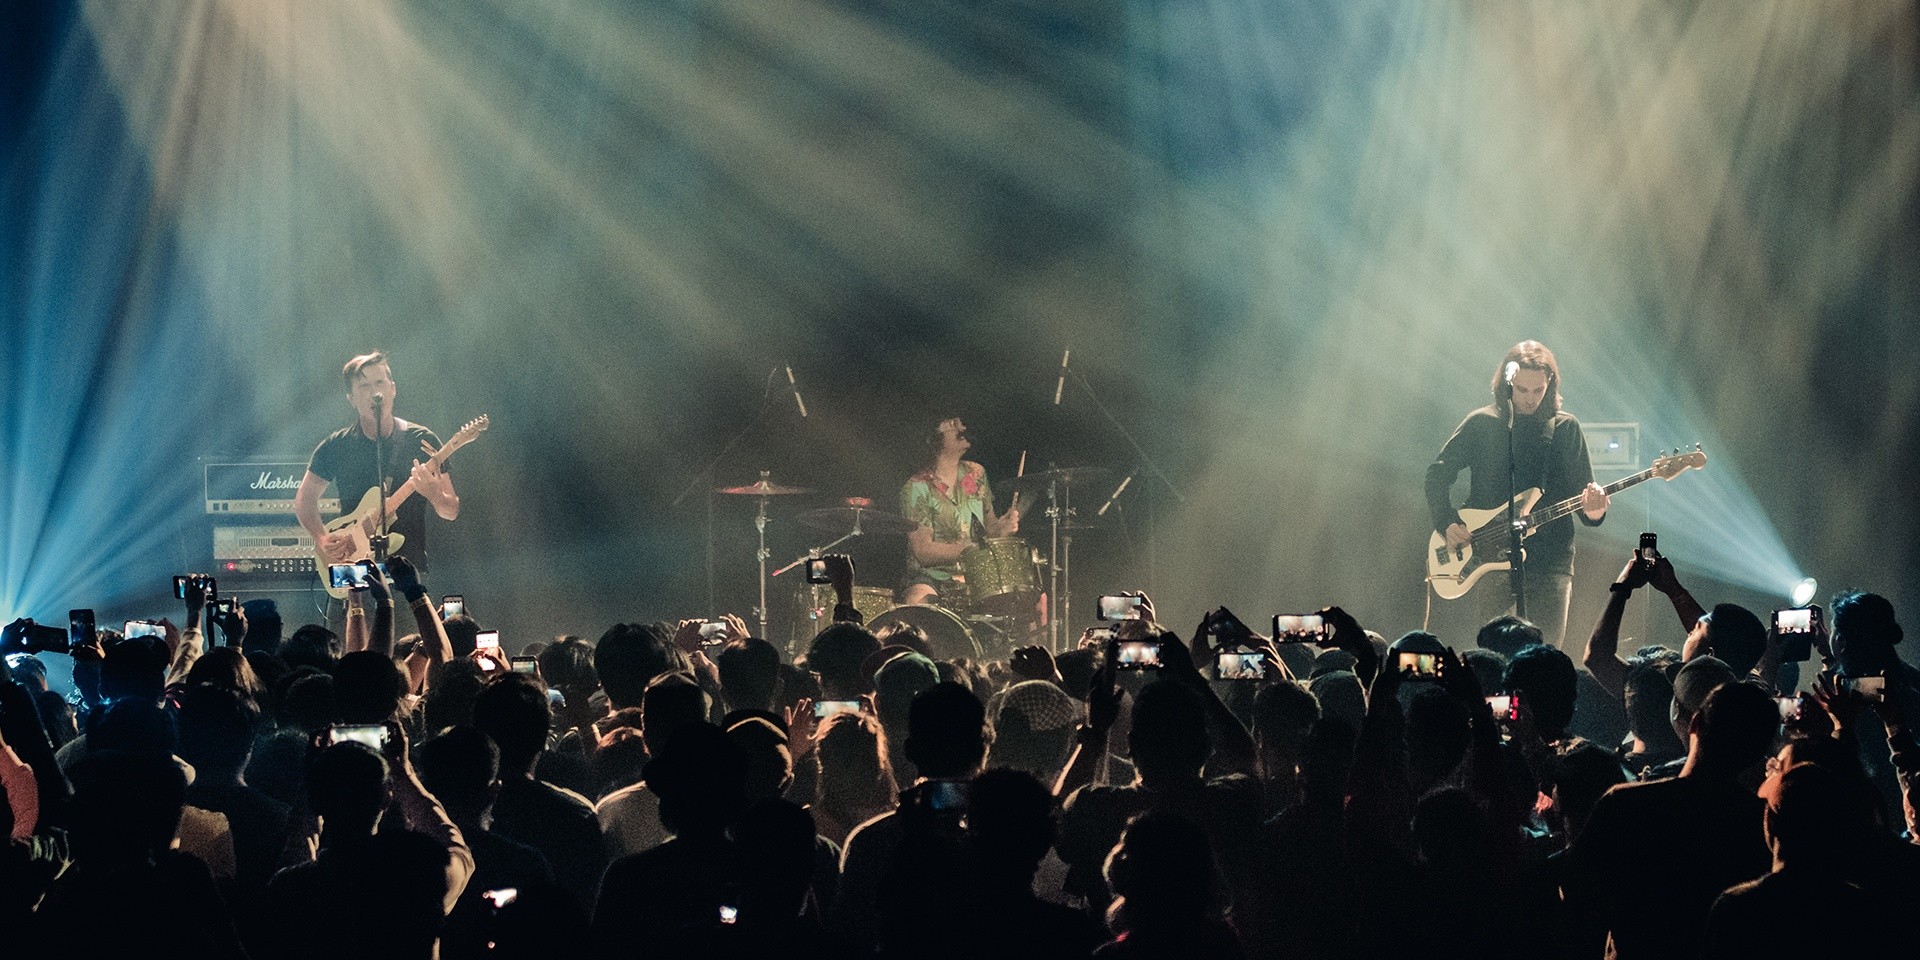 Tiny Moving Parts bring joy to their Filipino audience at Manila concert – photo gallery